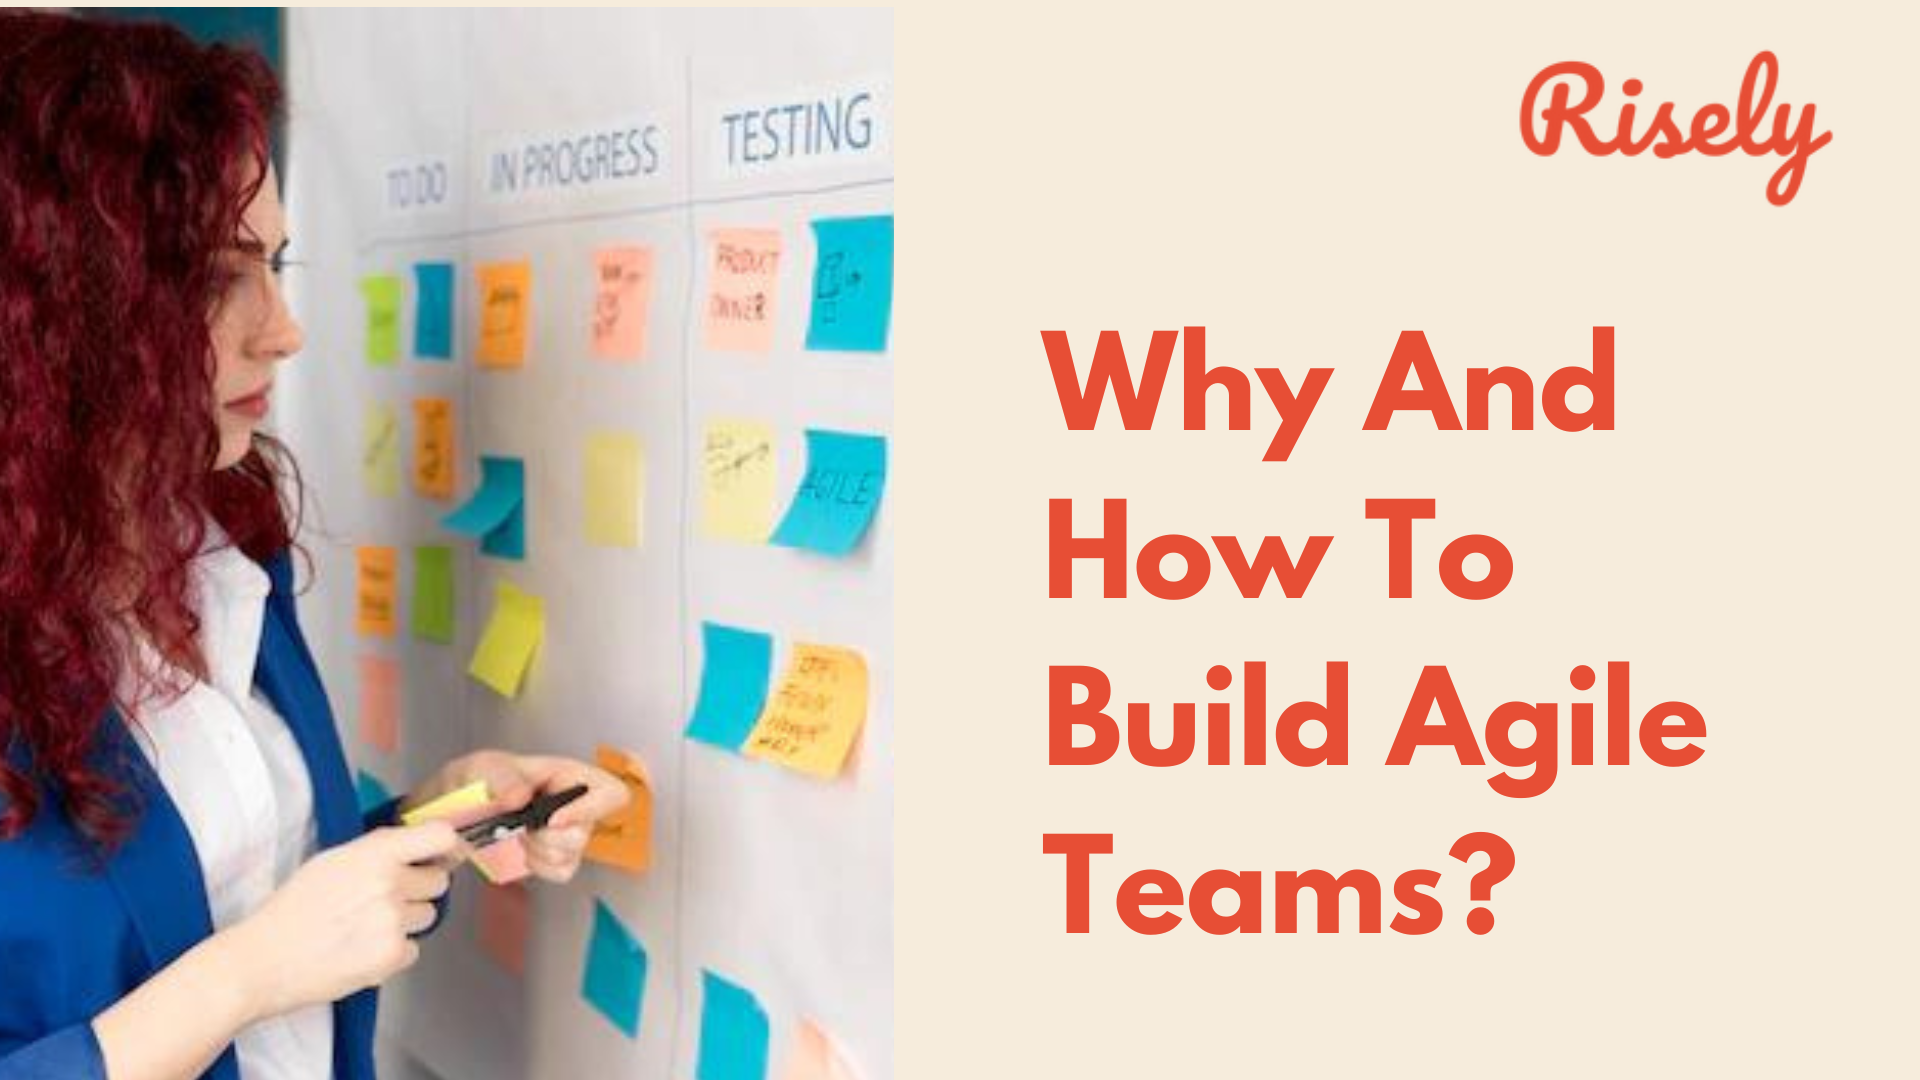 Why And How To Build Agile Teams?